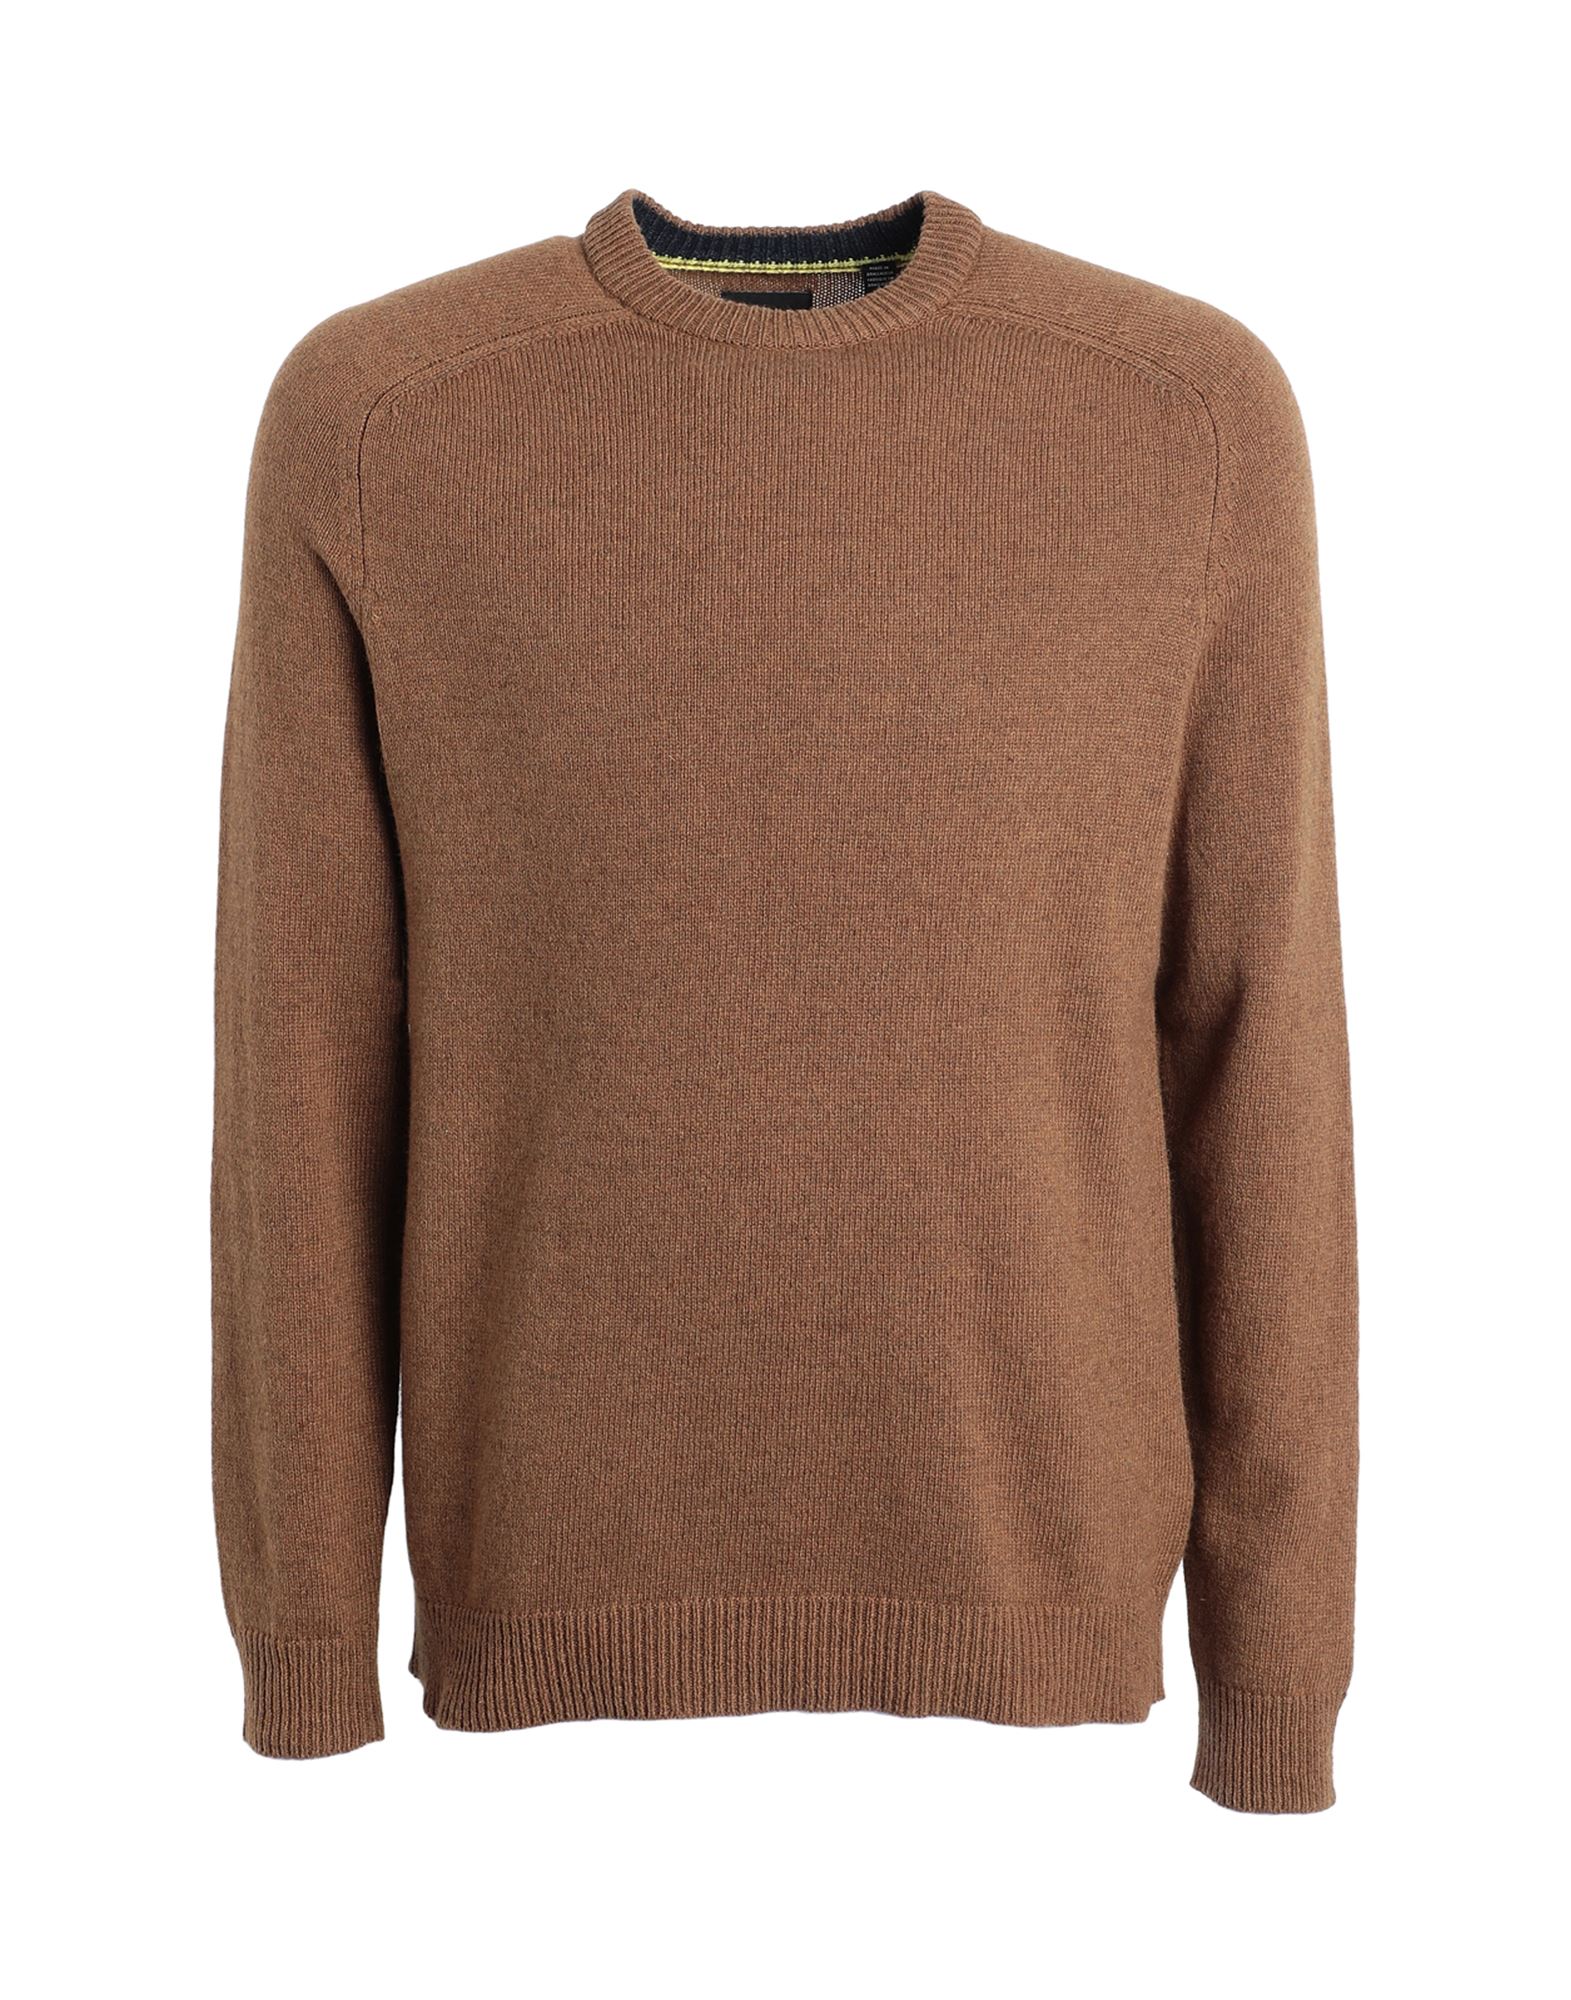 Only & Sons Man Sweater Brown Size S Cotton, Wool, Polyamide